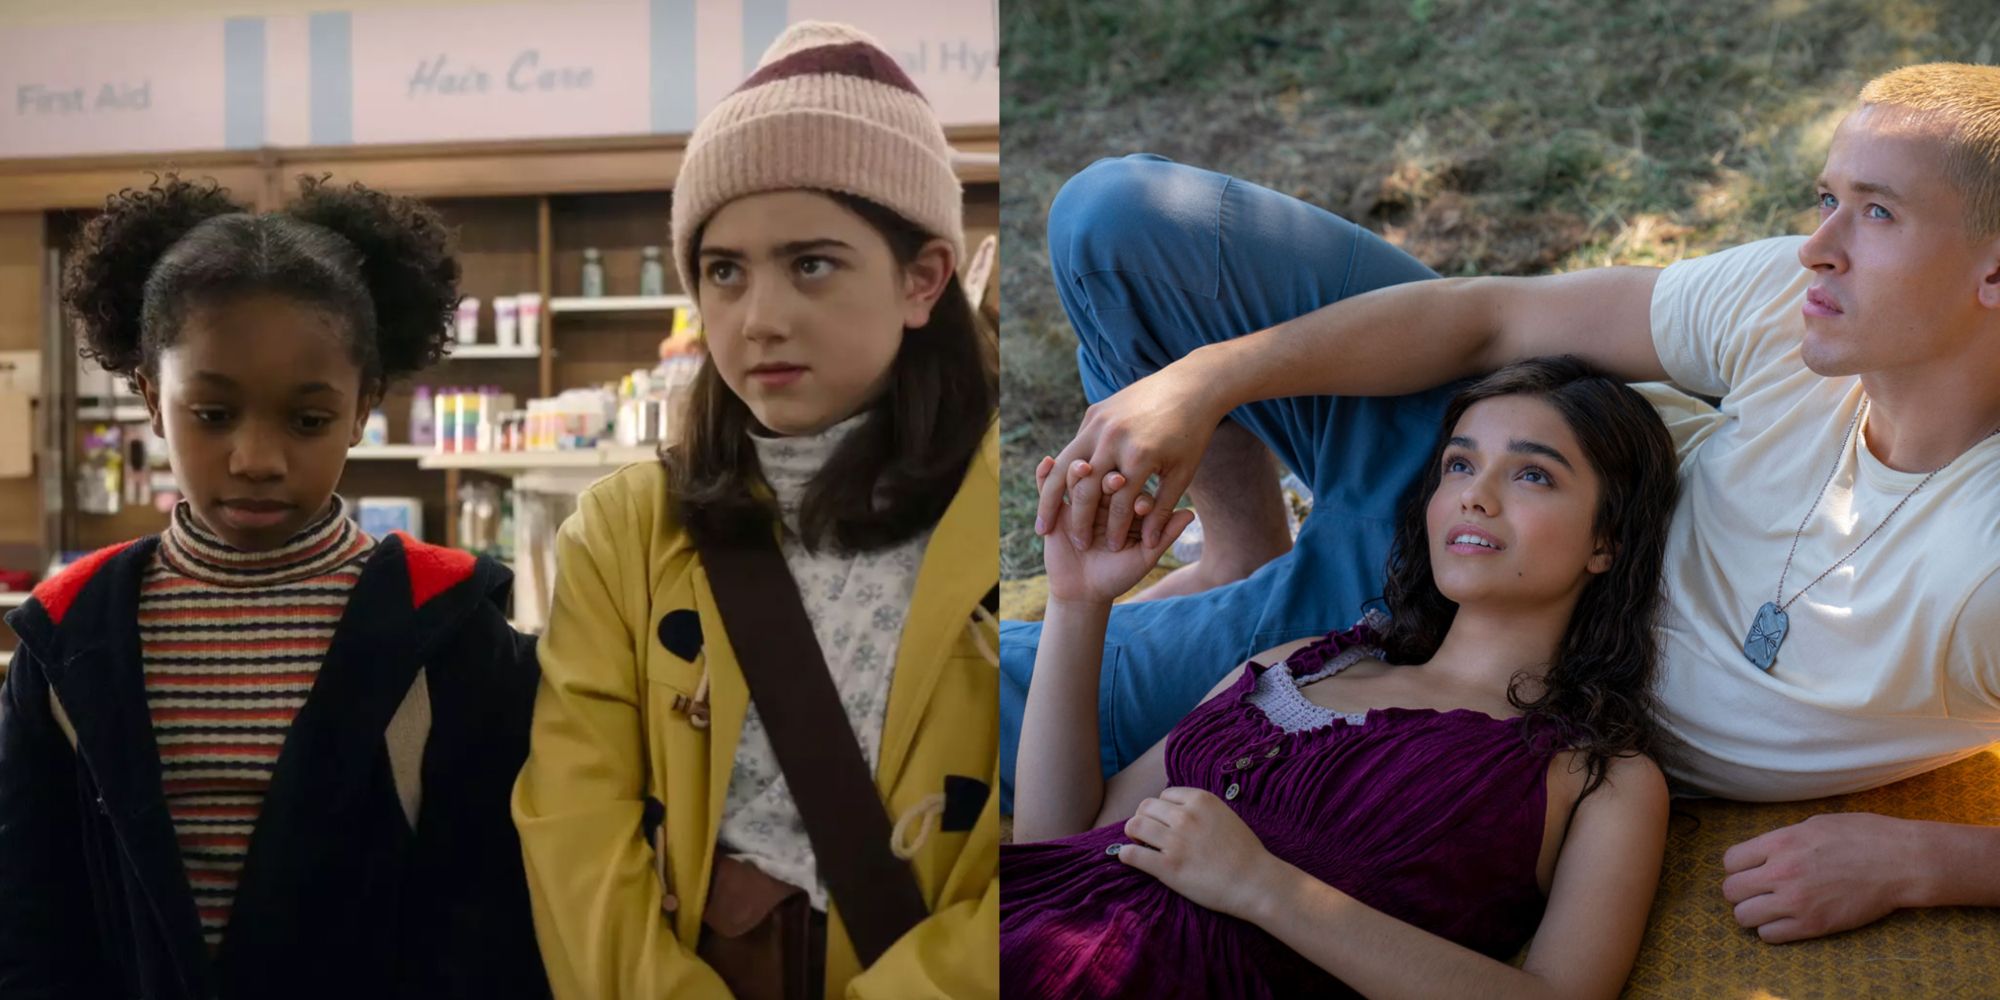 A split image features young girls in the movie adaptation of Are You There God? It's Me Margaret, and the young couple in Ballad of Songbirds and Snakes.